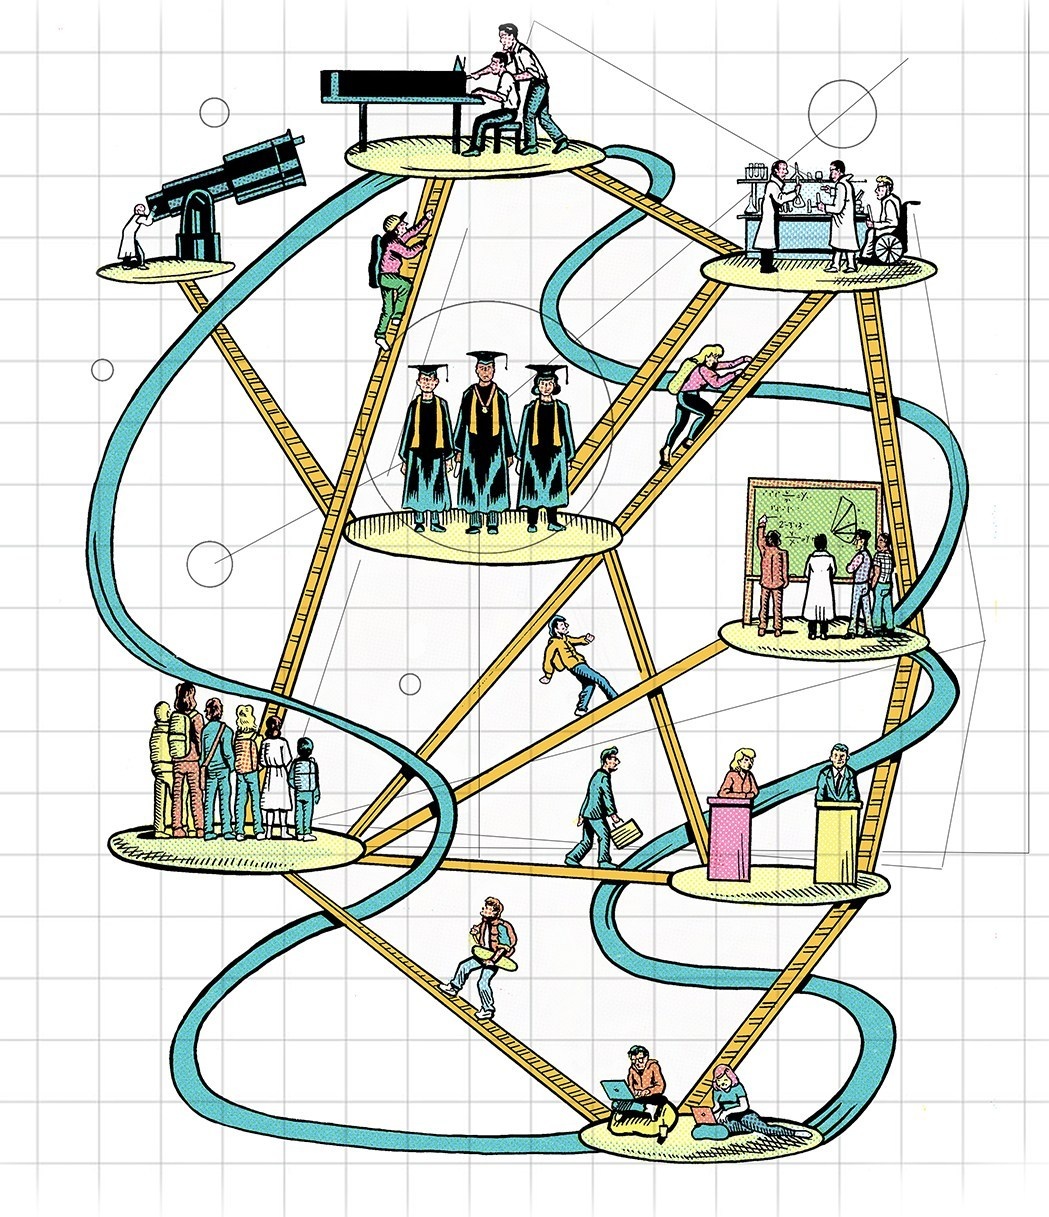 Illustration showing people connecting to different types of